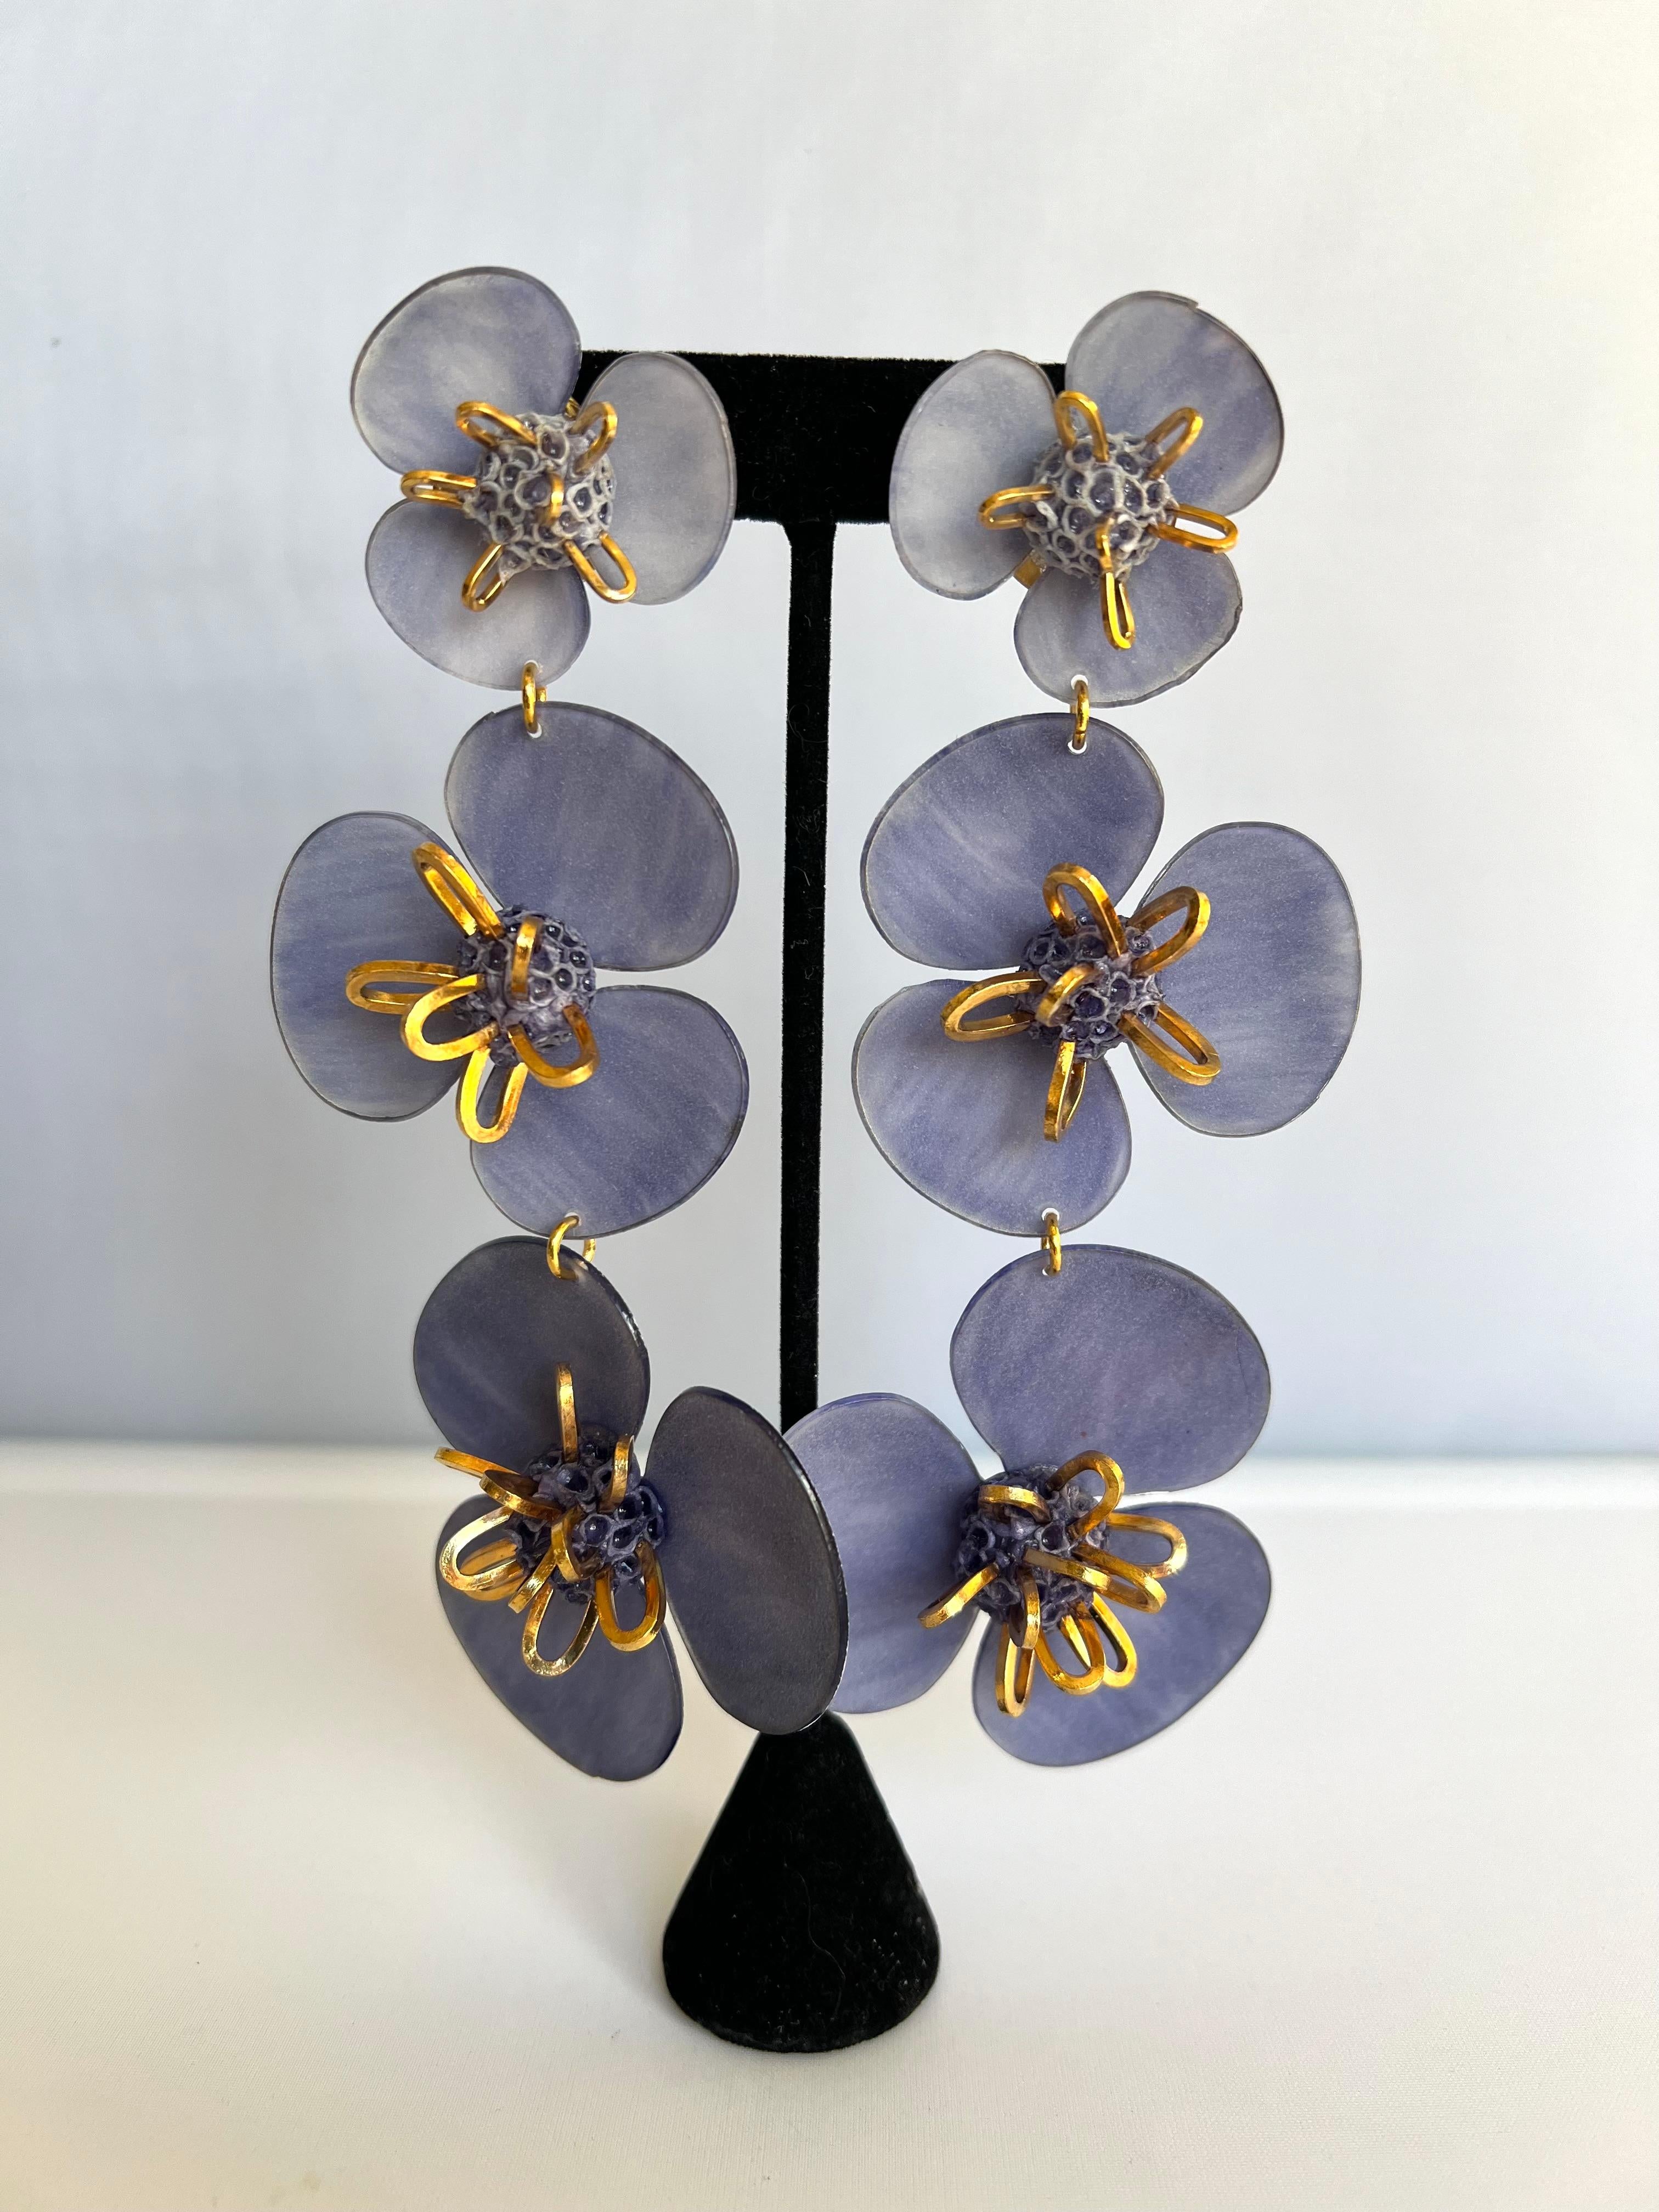 Light and easy to wear,  contemporary handmade artisanal statement pierced earrings handmade in Paris by Cilea. Concave lavender resin flower embellished with gilt-metal applications clustered together - signed 